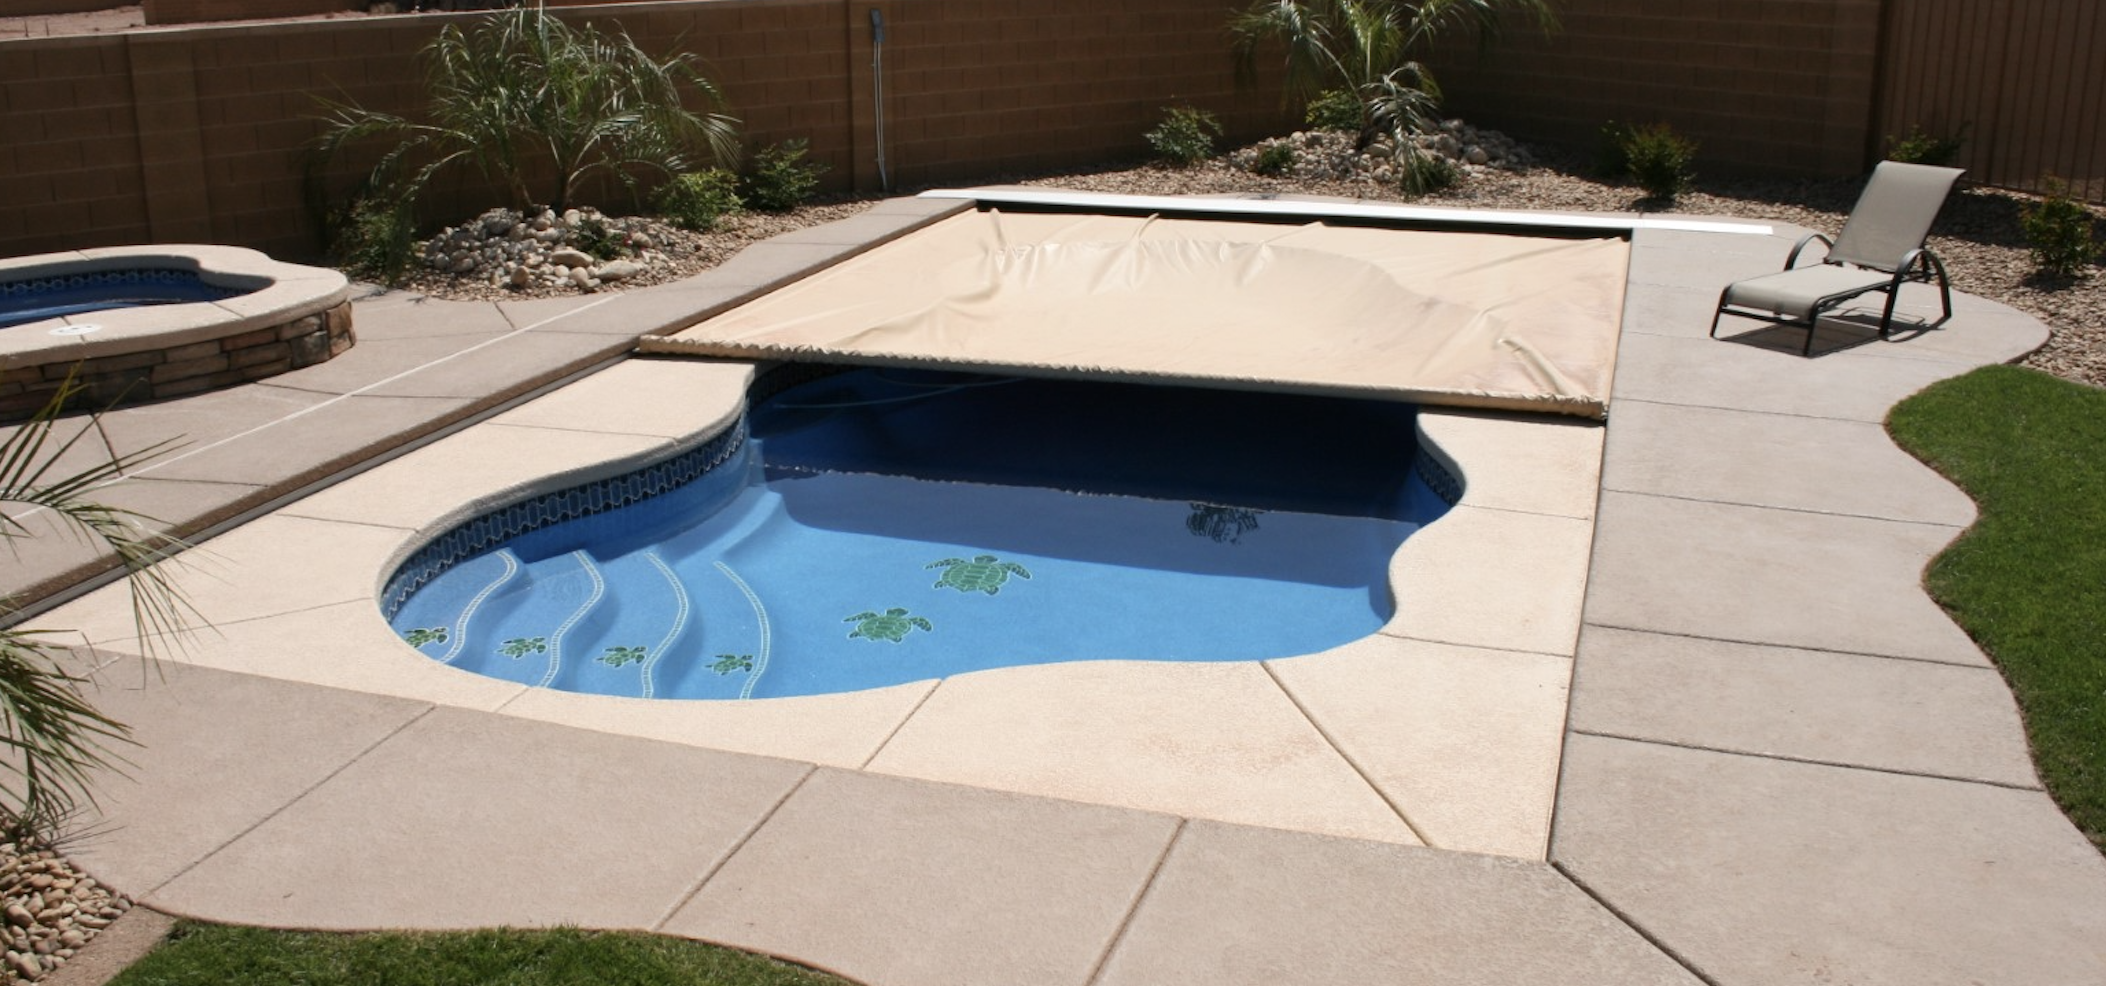 Swimming Pool Covers and Their Impact on Water Chemistry